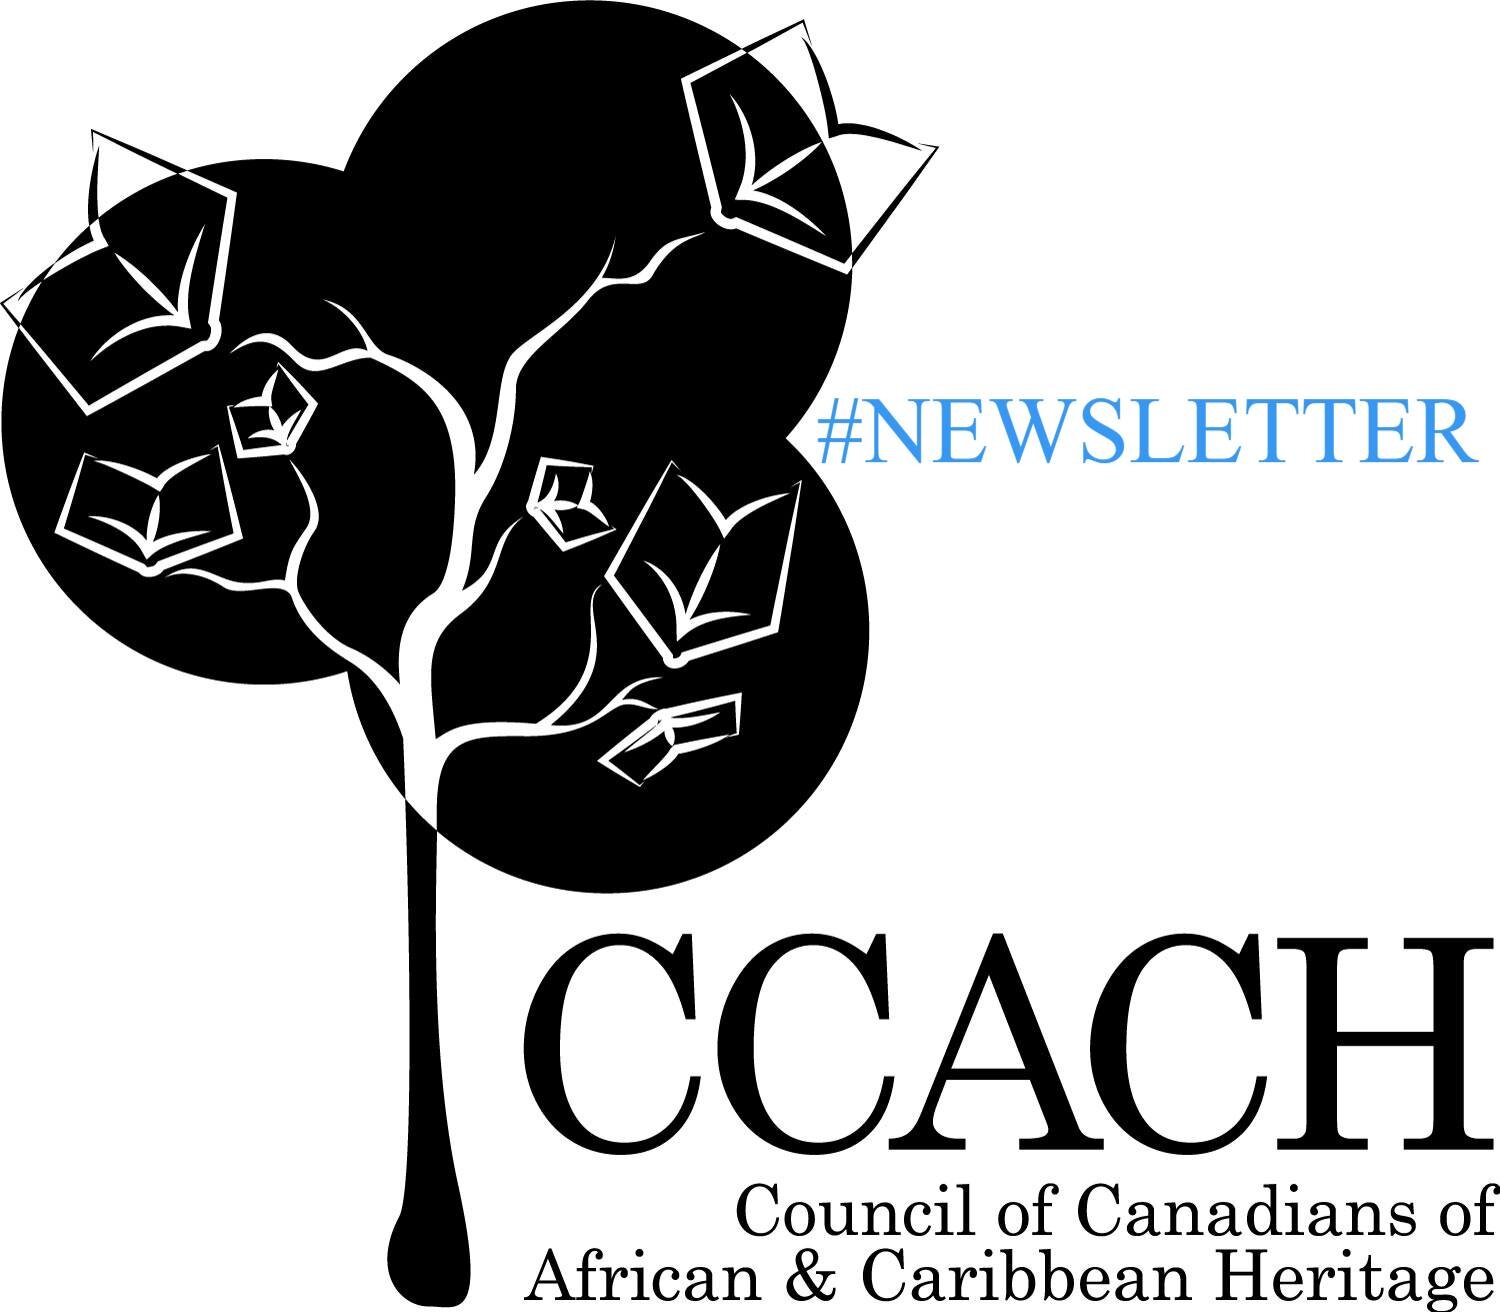 Do you get our newsletter? The best way is to become a member of CCACH so you do not miss out. Check out our Youth Opportunities page on our website for more youth opportunities and scholarships. 

https://www.eventbrite.com/e/mental-health-first-aid